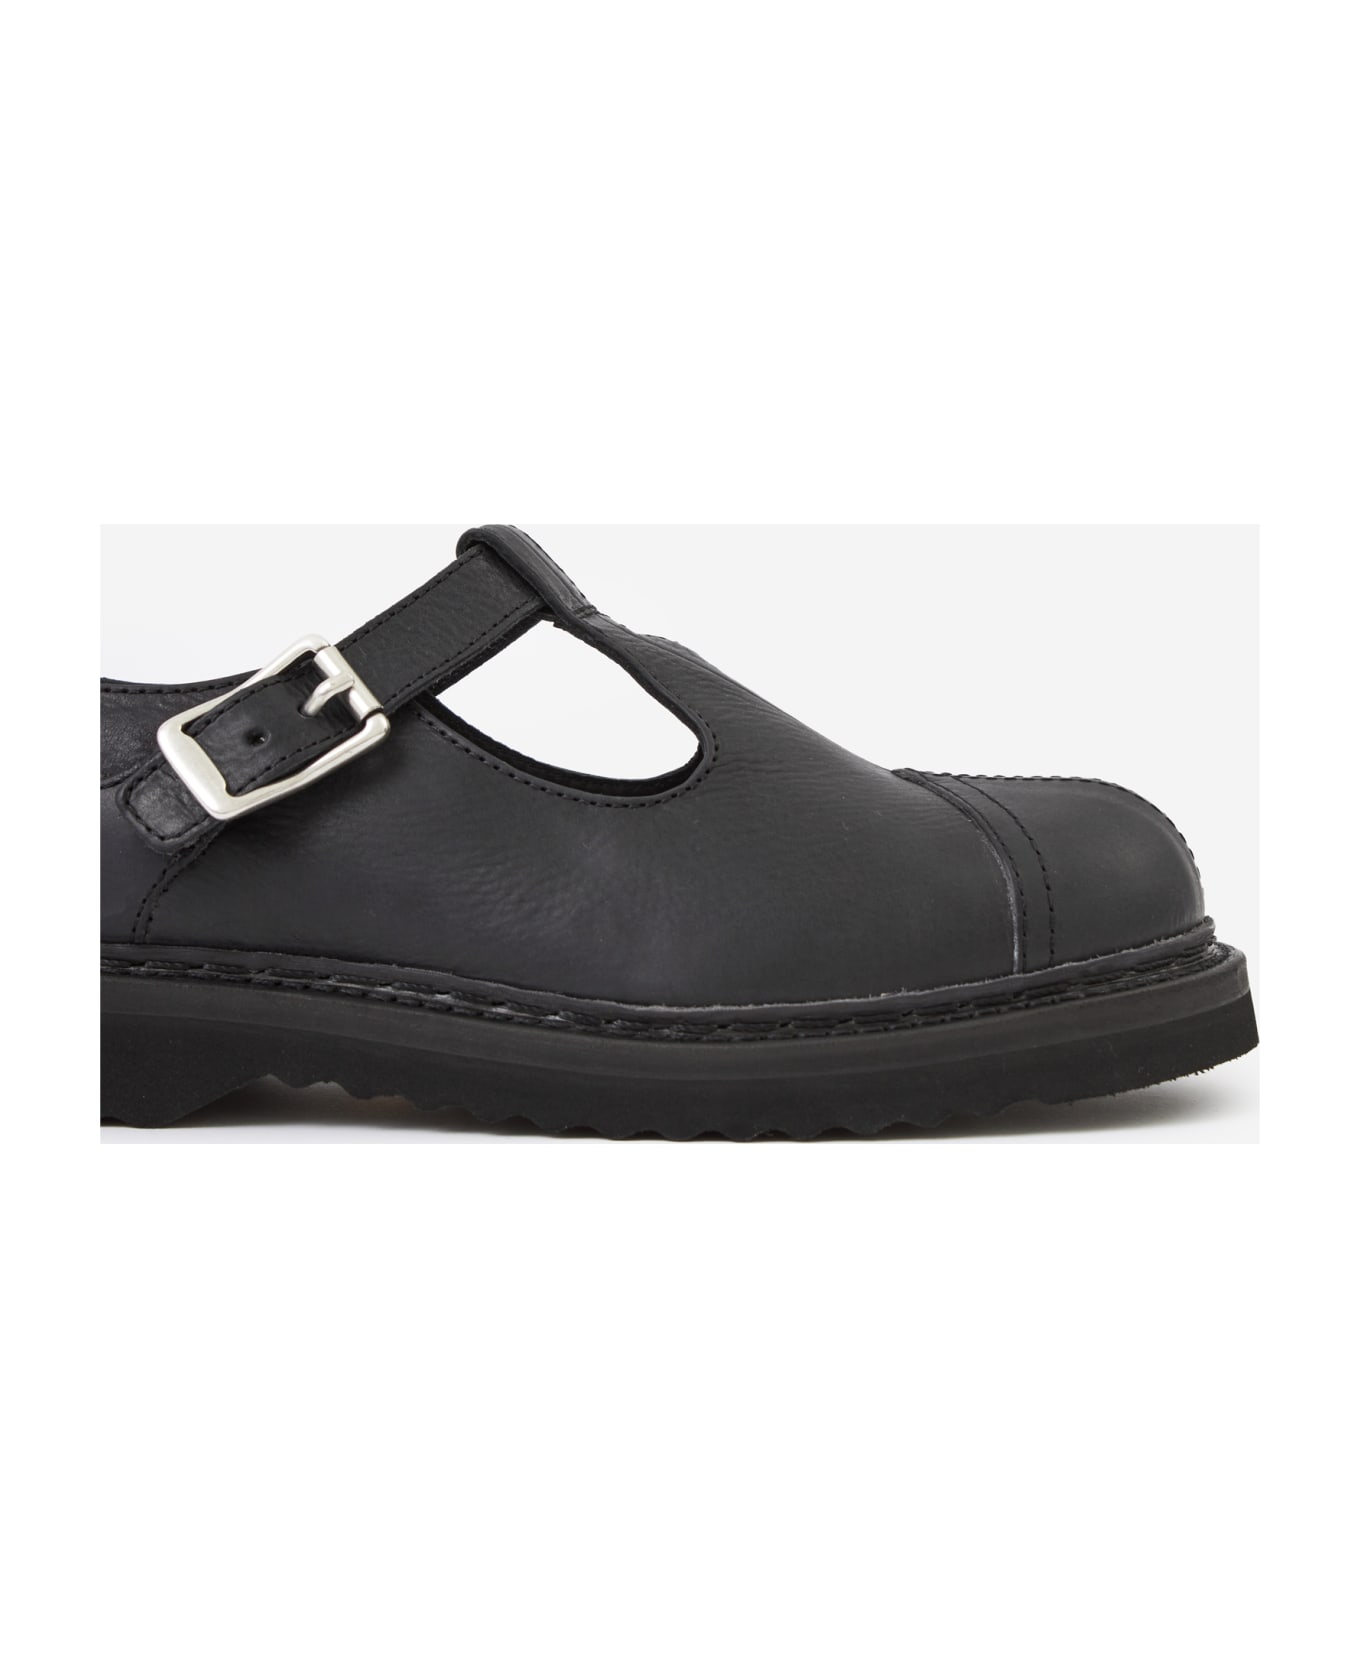 Our Legacy Camden Shoe Shoes - black